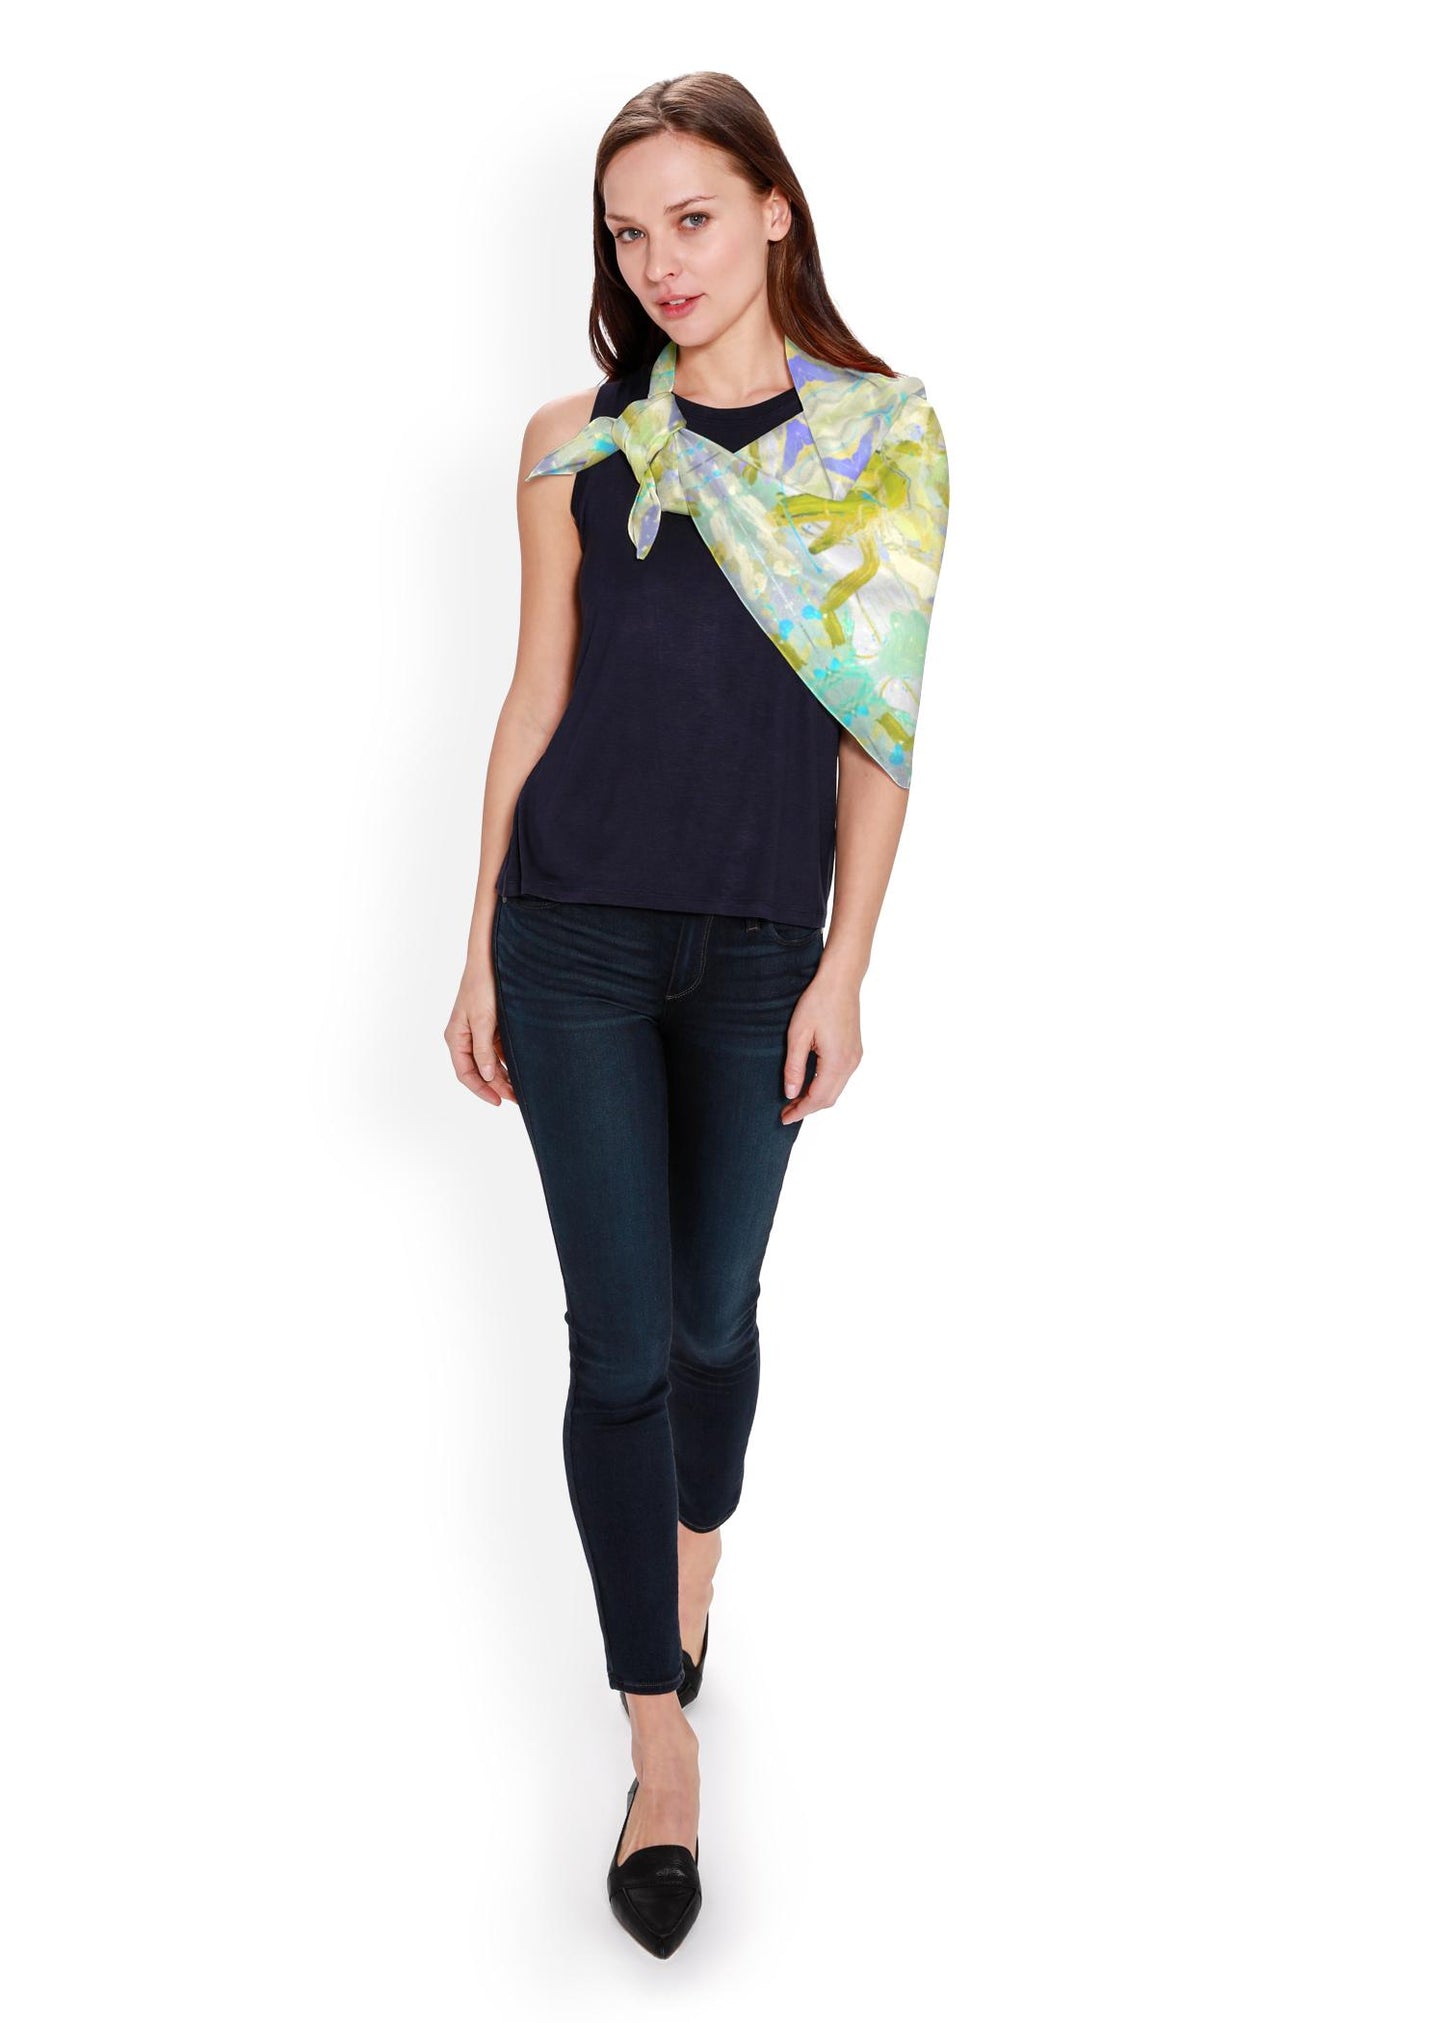 Silk Square Scarf - 36 inch - Lime "Free Flow"